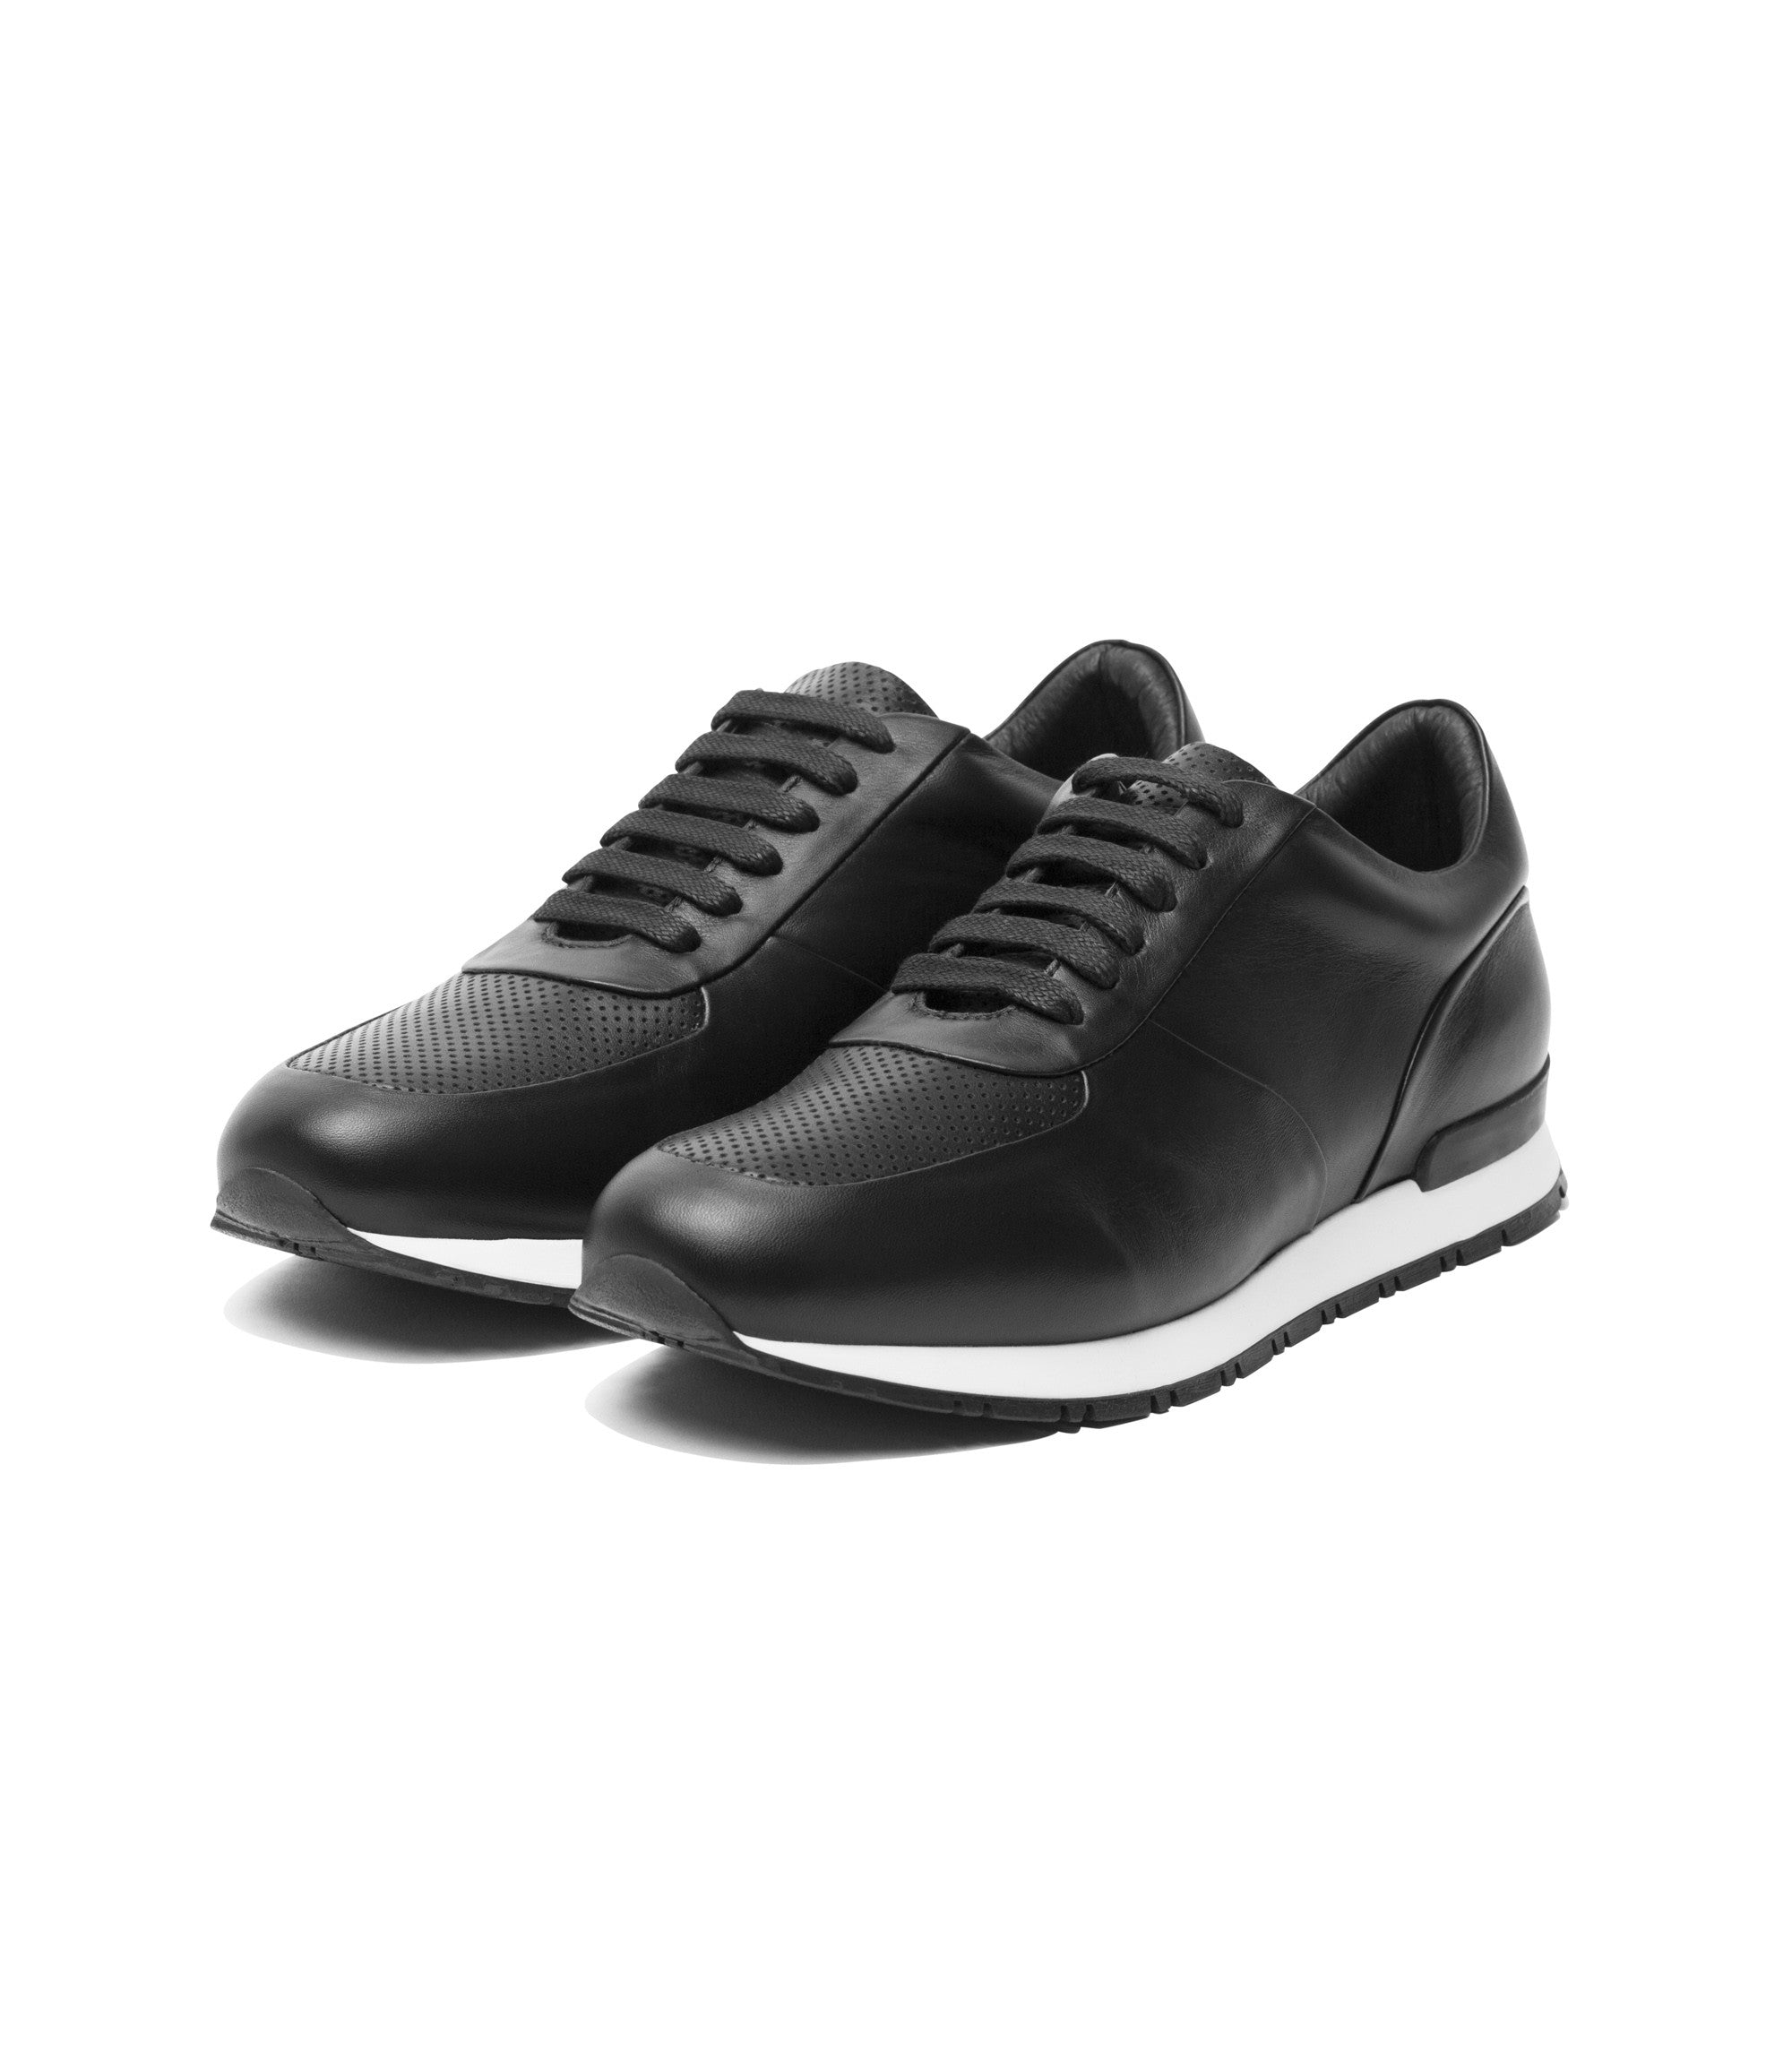 wings+horns leather trainer | wings+horns